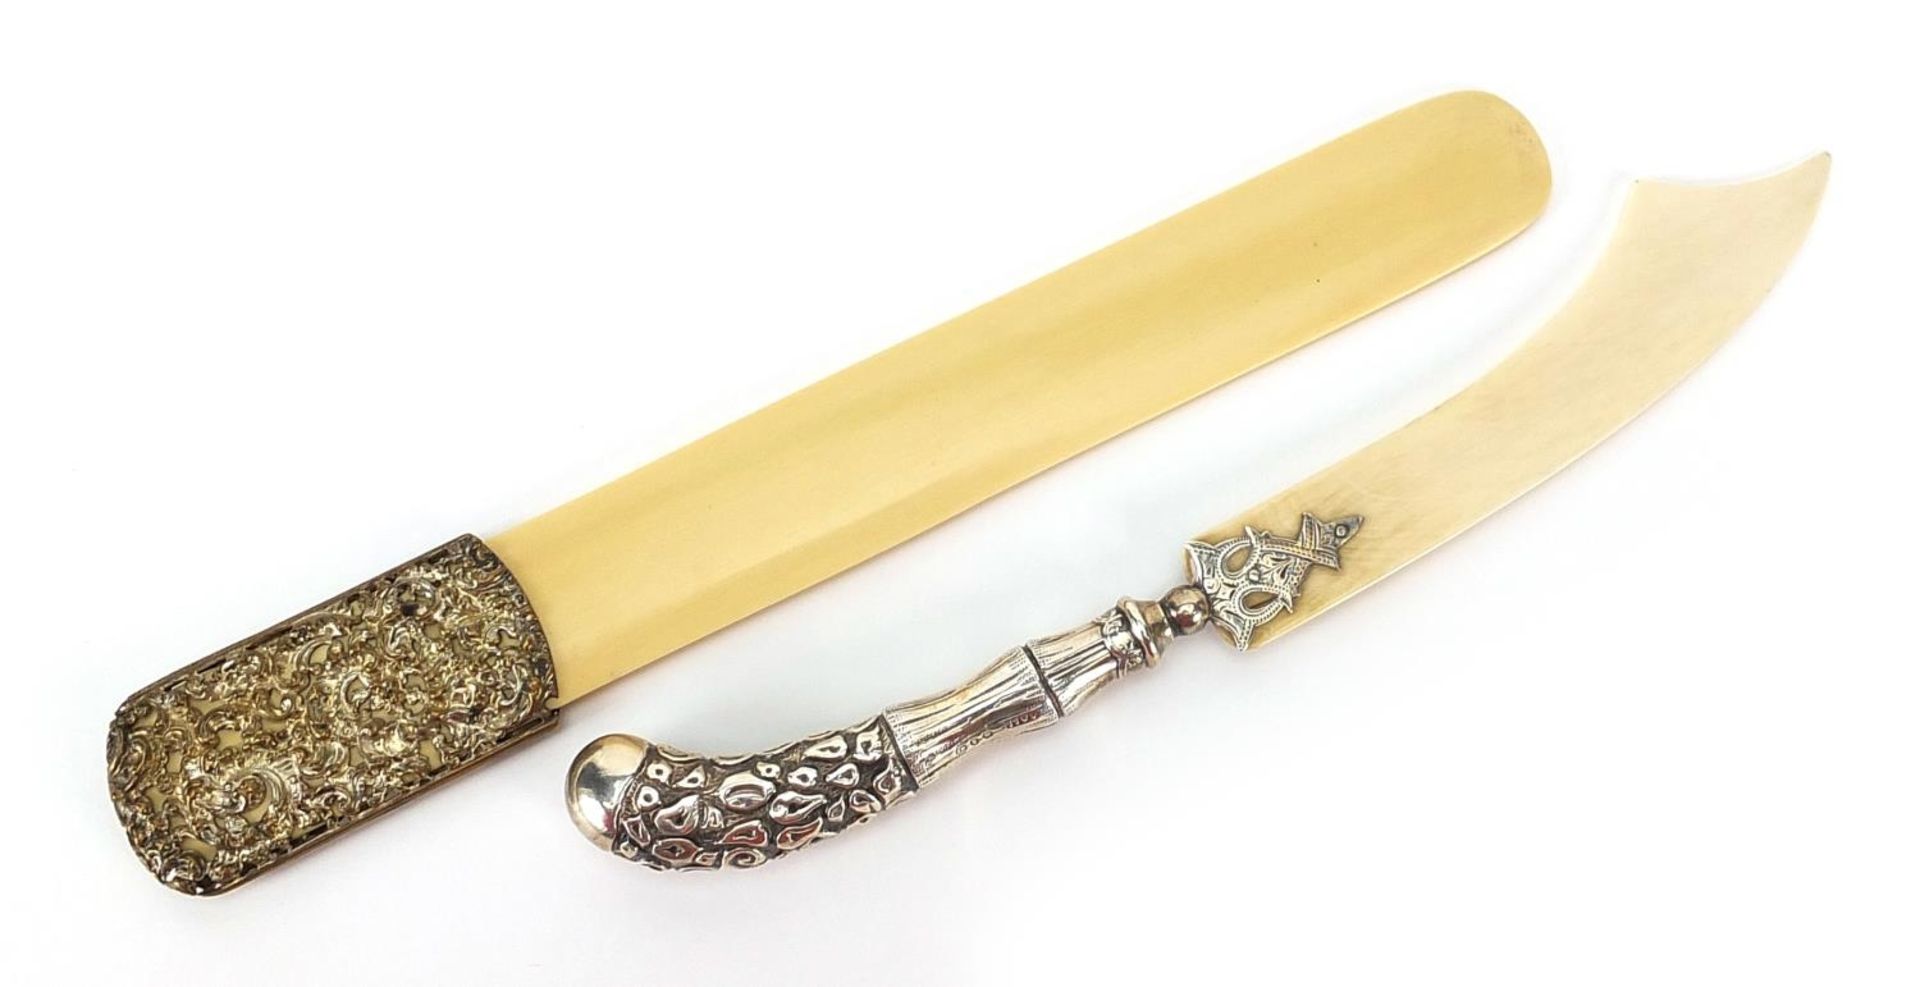 Ivorine page turner and a letter opener with silver handle, the largest 25cm in length - Image 2 of 3